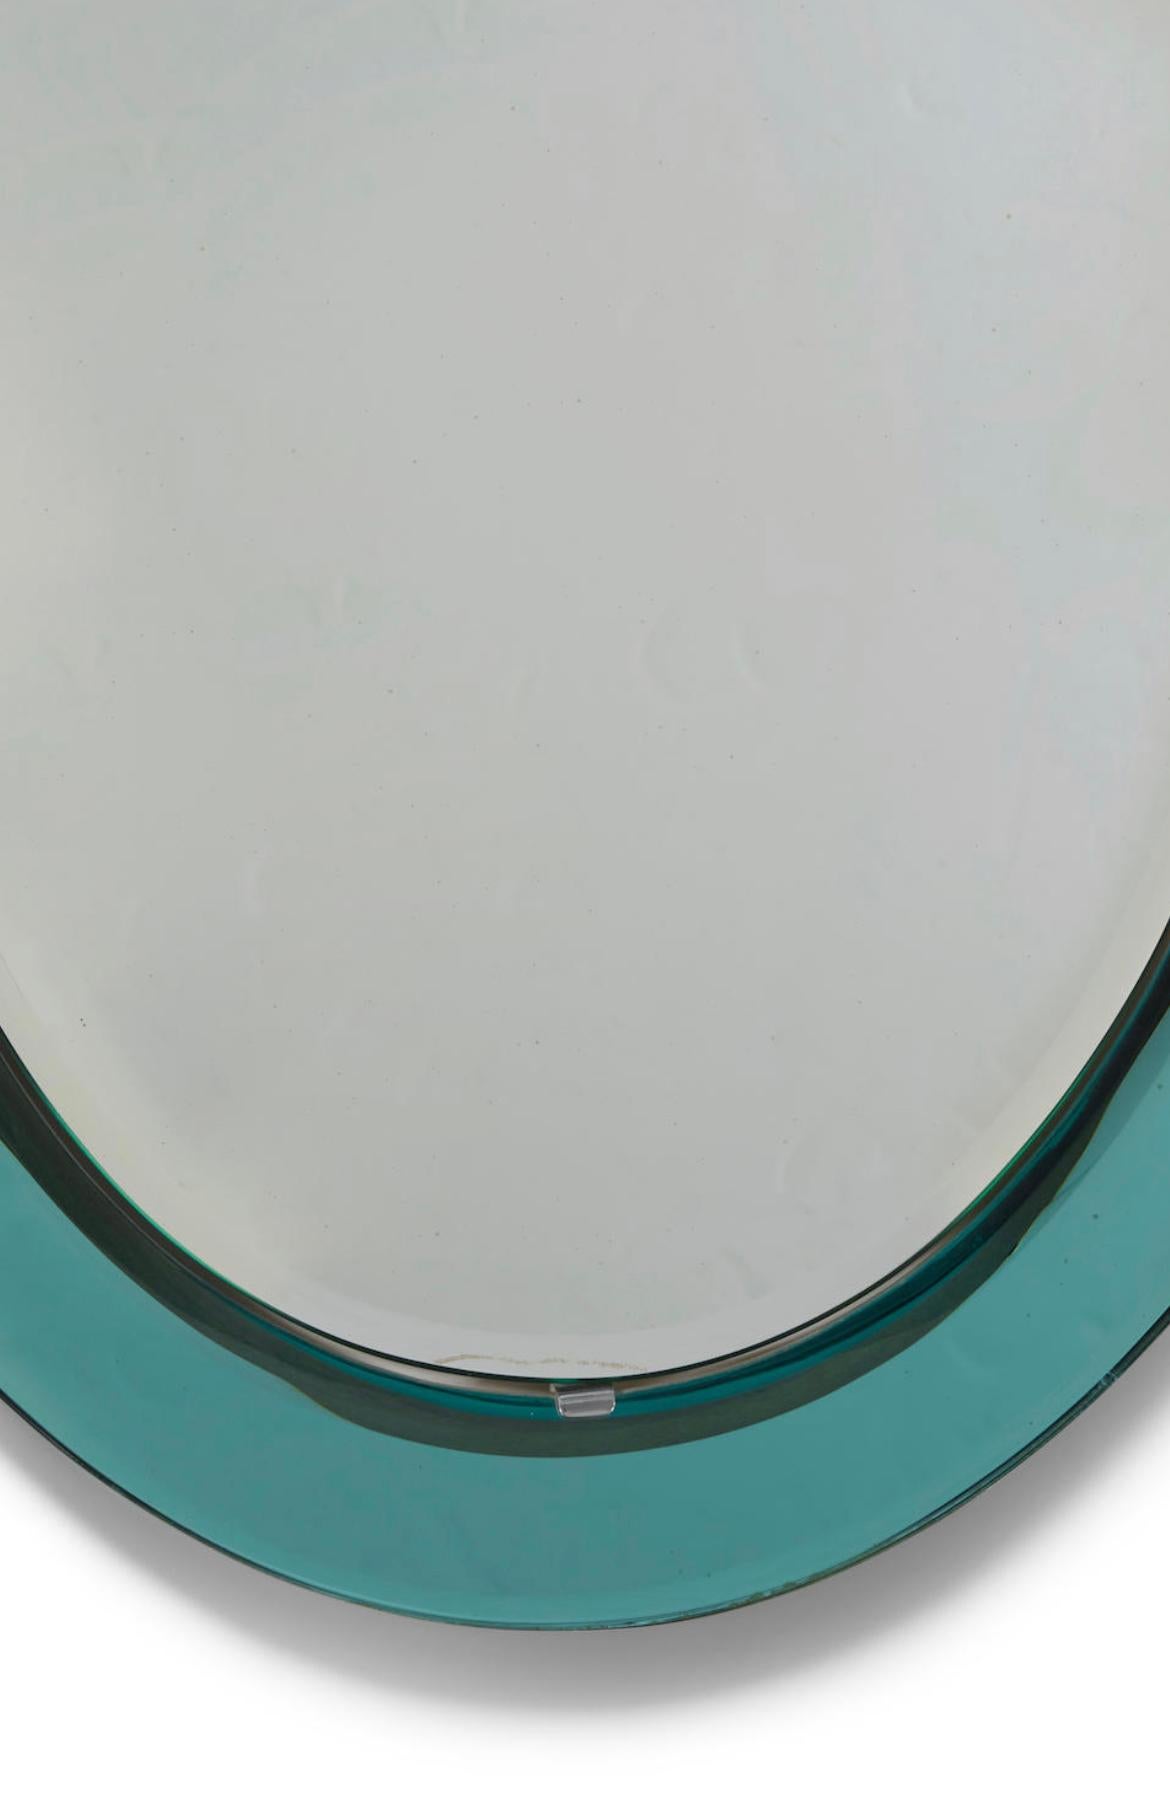 Oval wall mirror by Cristal Arte (Founded 1944). Colored and clear mirrored glass, chromed metal. Italy, 1950s.